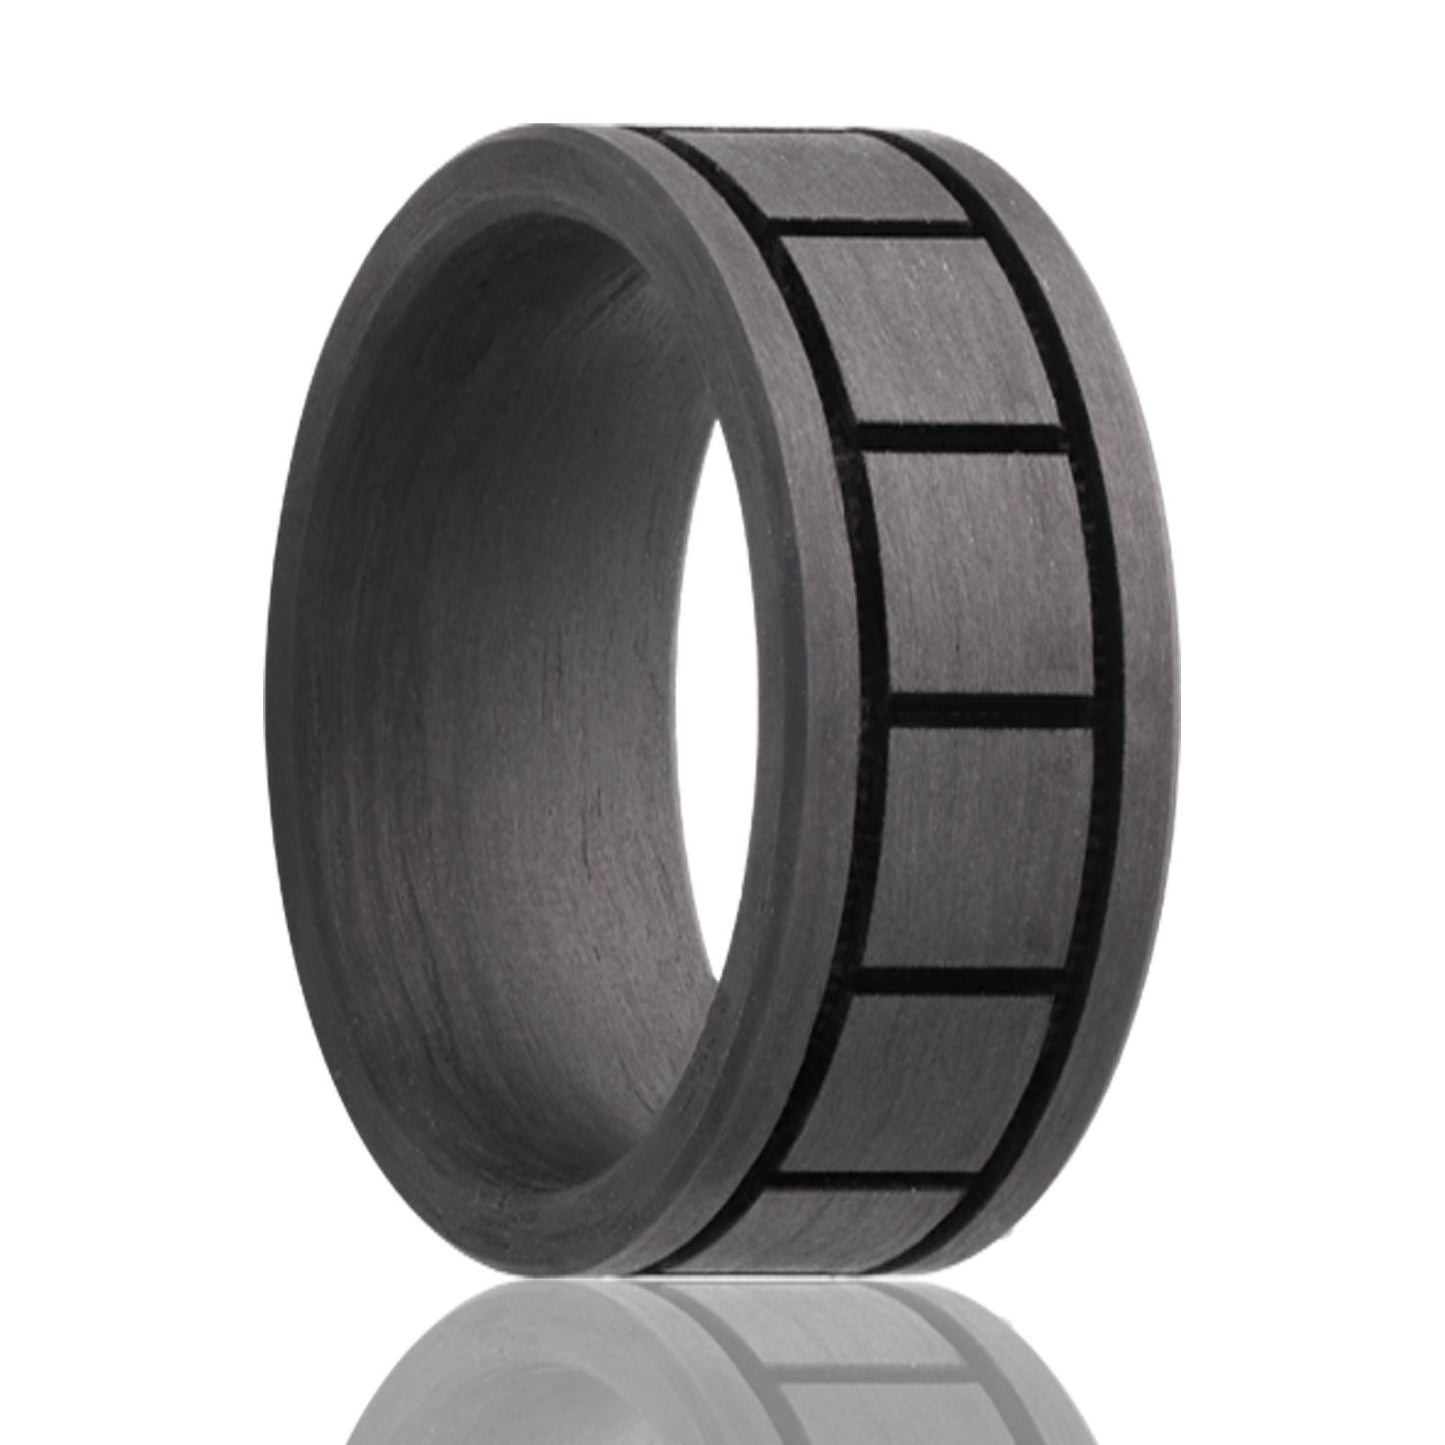 A square pattern carbon fiber men's wedding band displayed on a neutral white background.